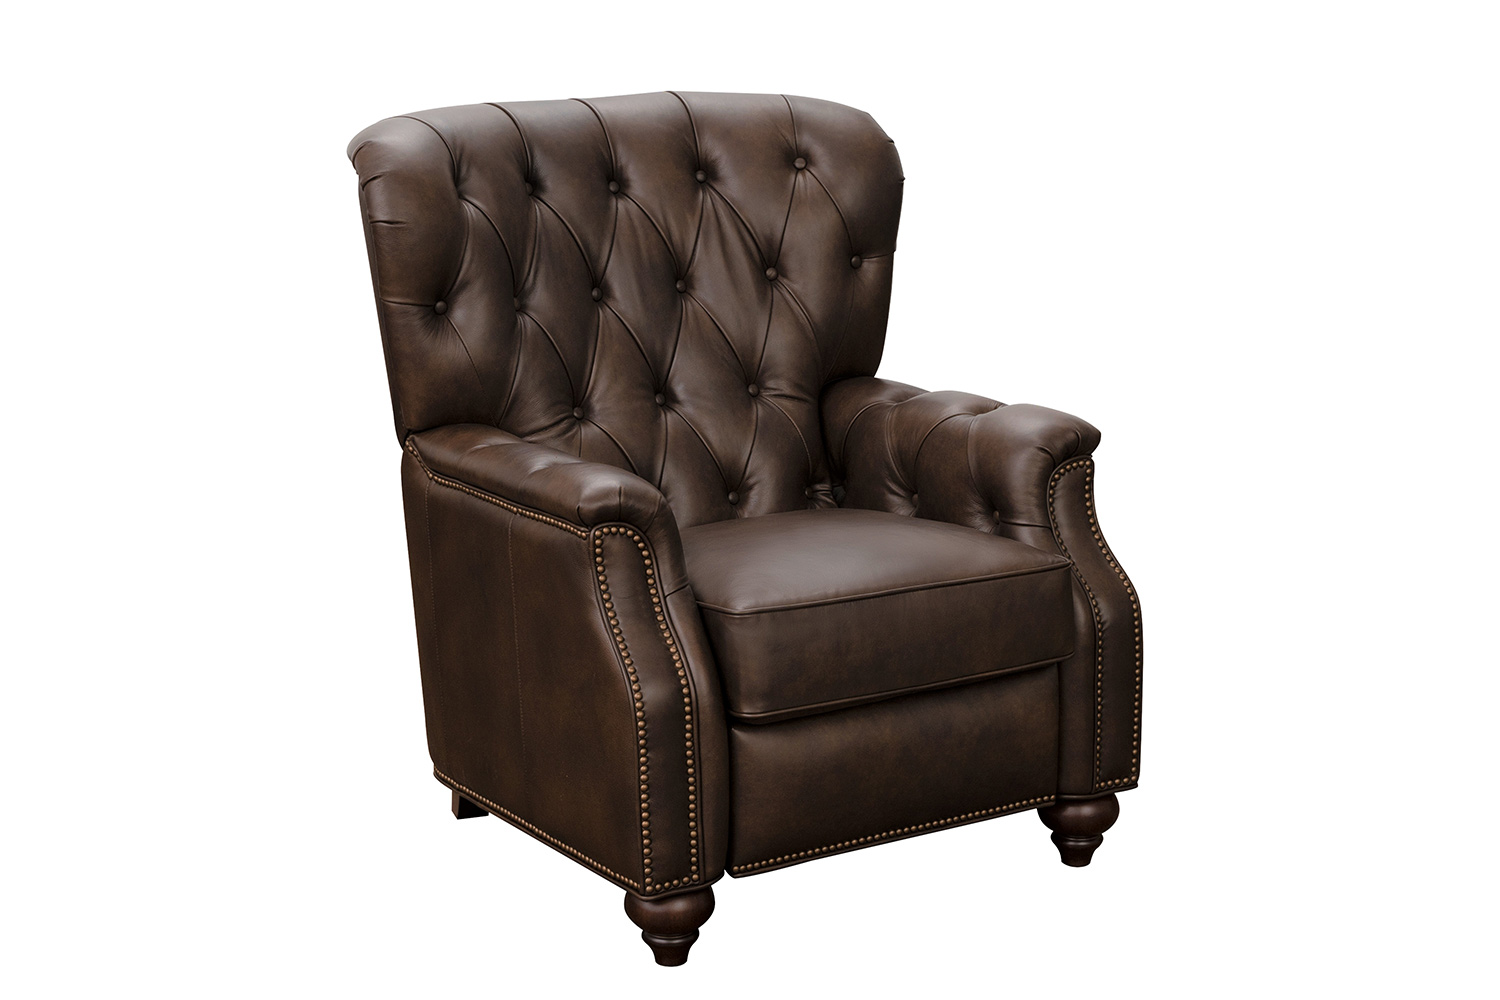 Barcalounger Lombard Recliner Chair - Ashford Walnut/All Leather